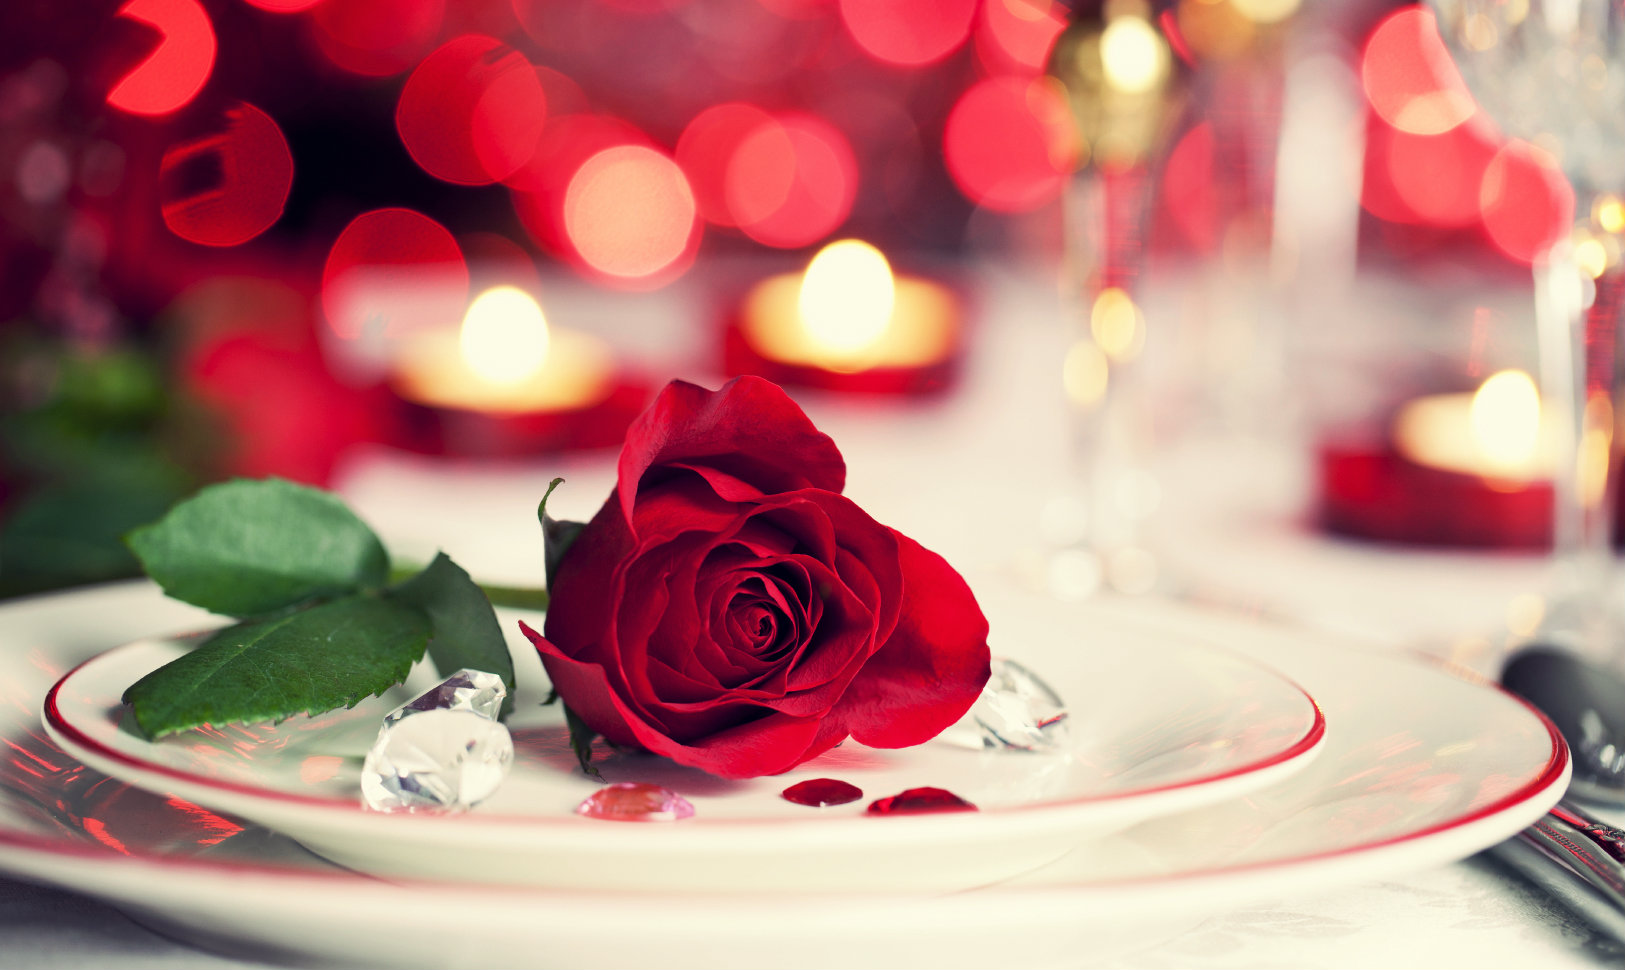 Romance and intimacy in valentine's day